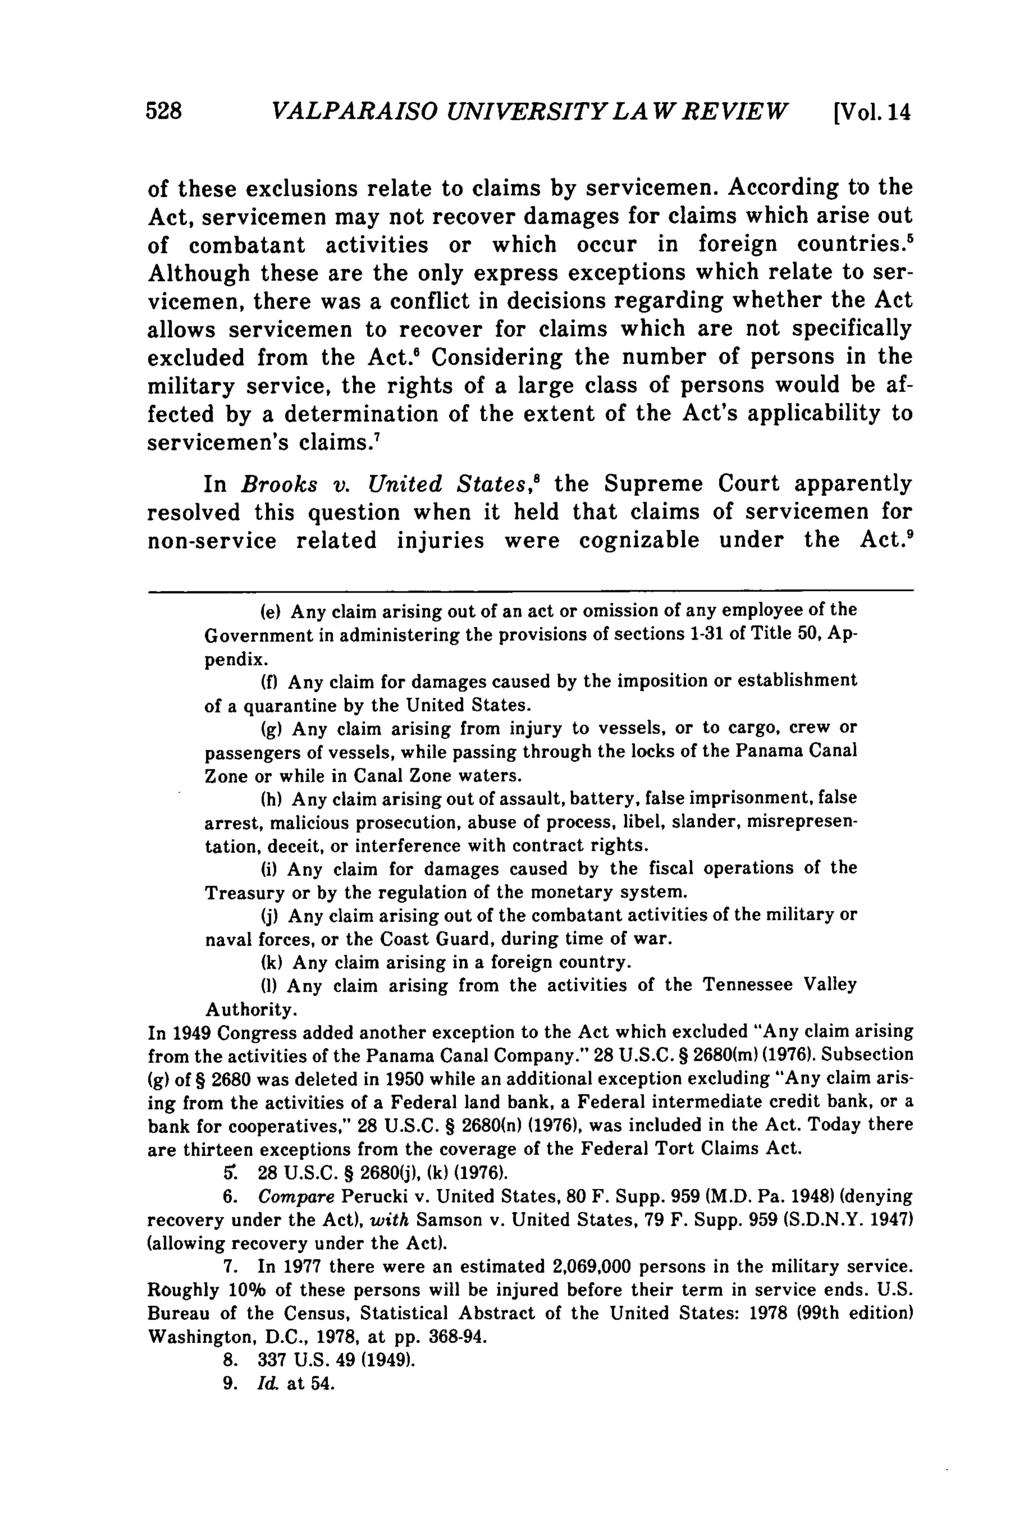 Valparaiso University Law Review, Vol. 14, No. 3 [1980], Art. 5 528 VALPARAISO UNIVERSITY LAW REVIEW [Vol.14 of these exclusions relate to claims by servicemen.